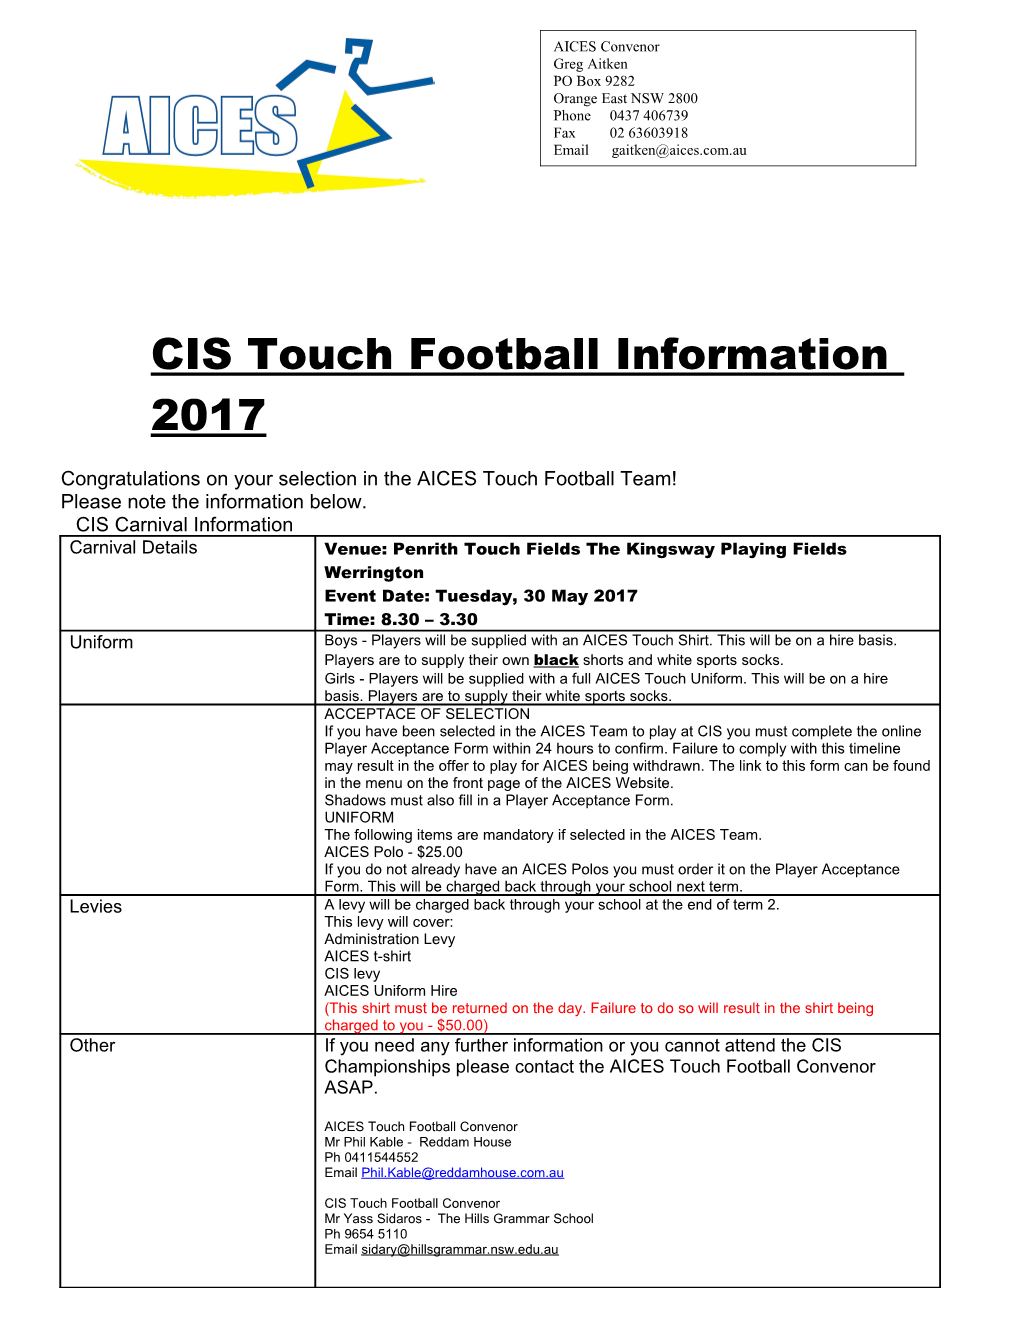 CIS Touch Football Information 2017